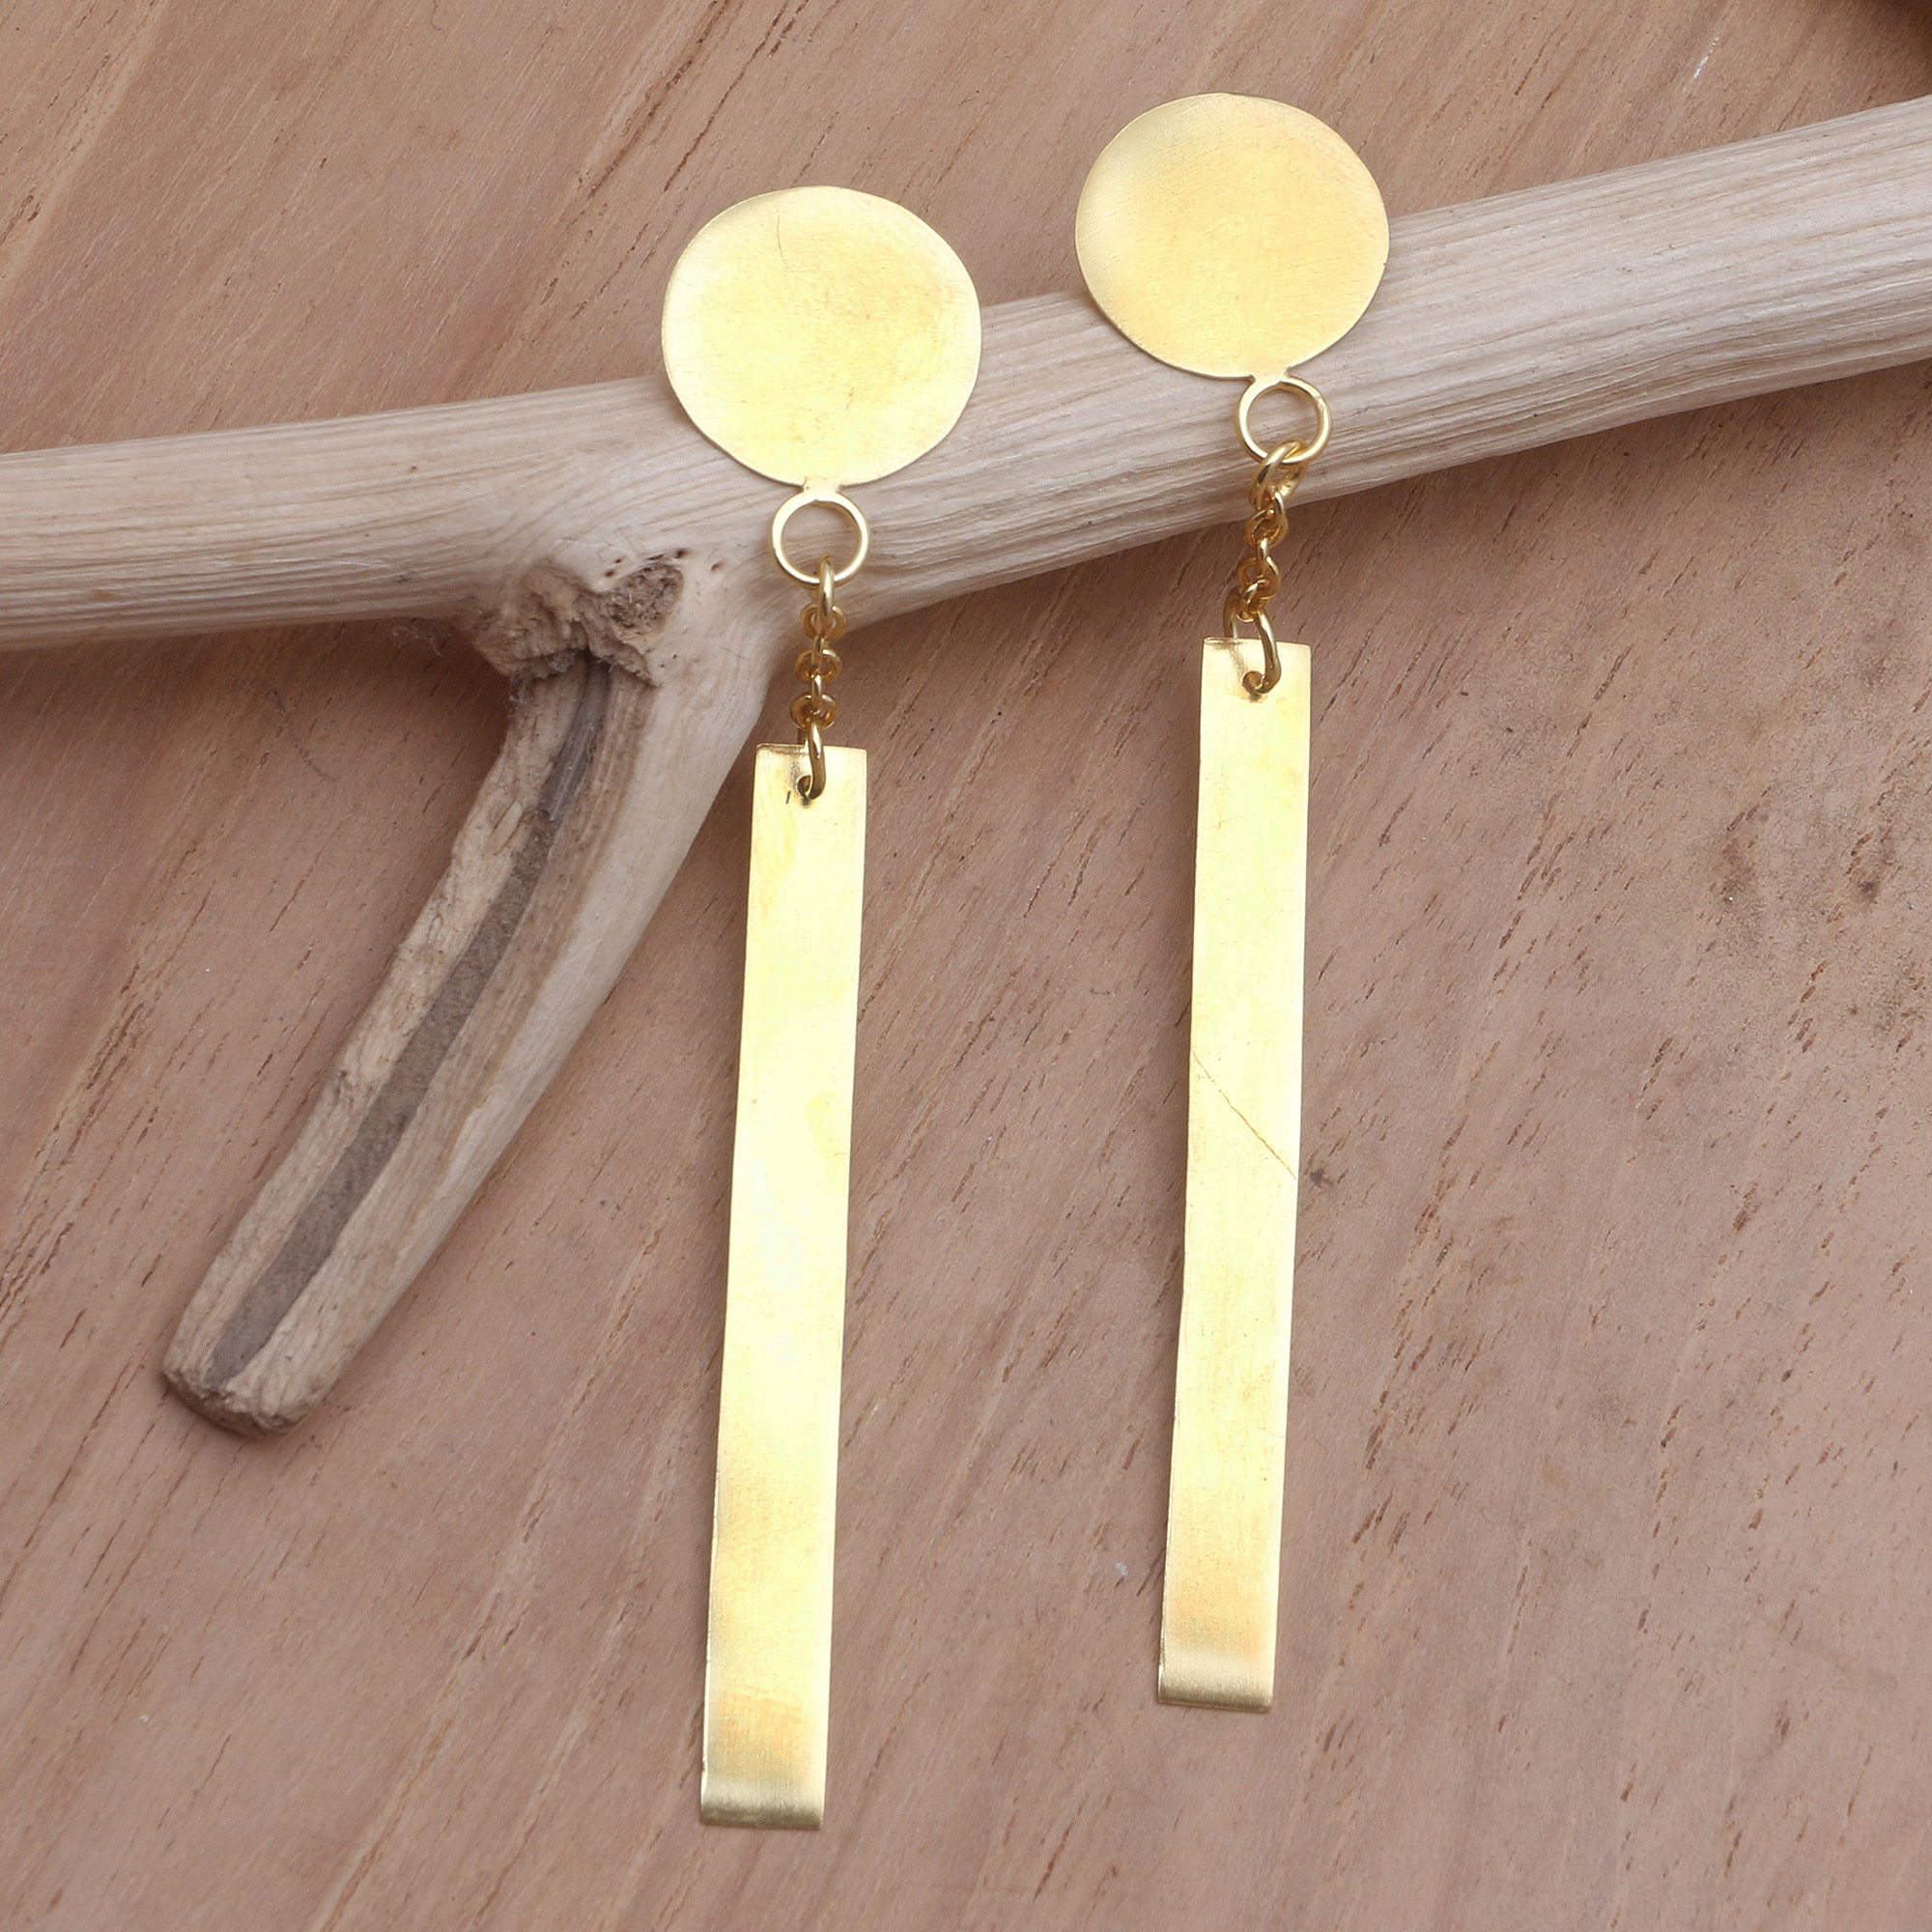 Artisan Crafted Gold-Plated Dangle Earrings - Golden Fire